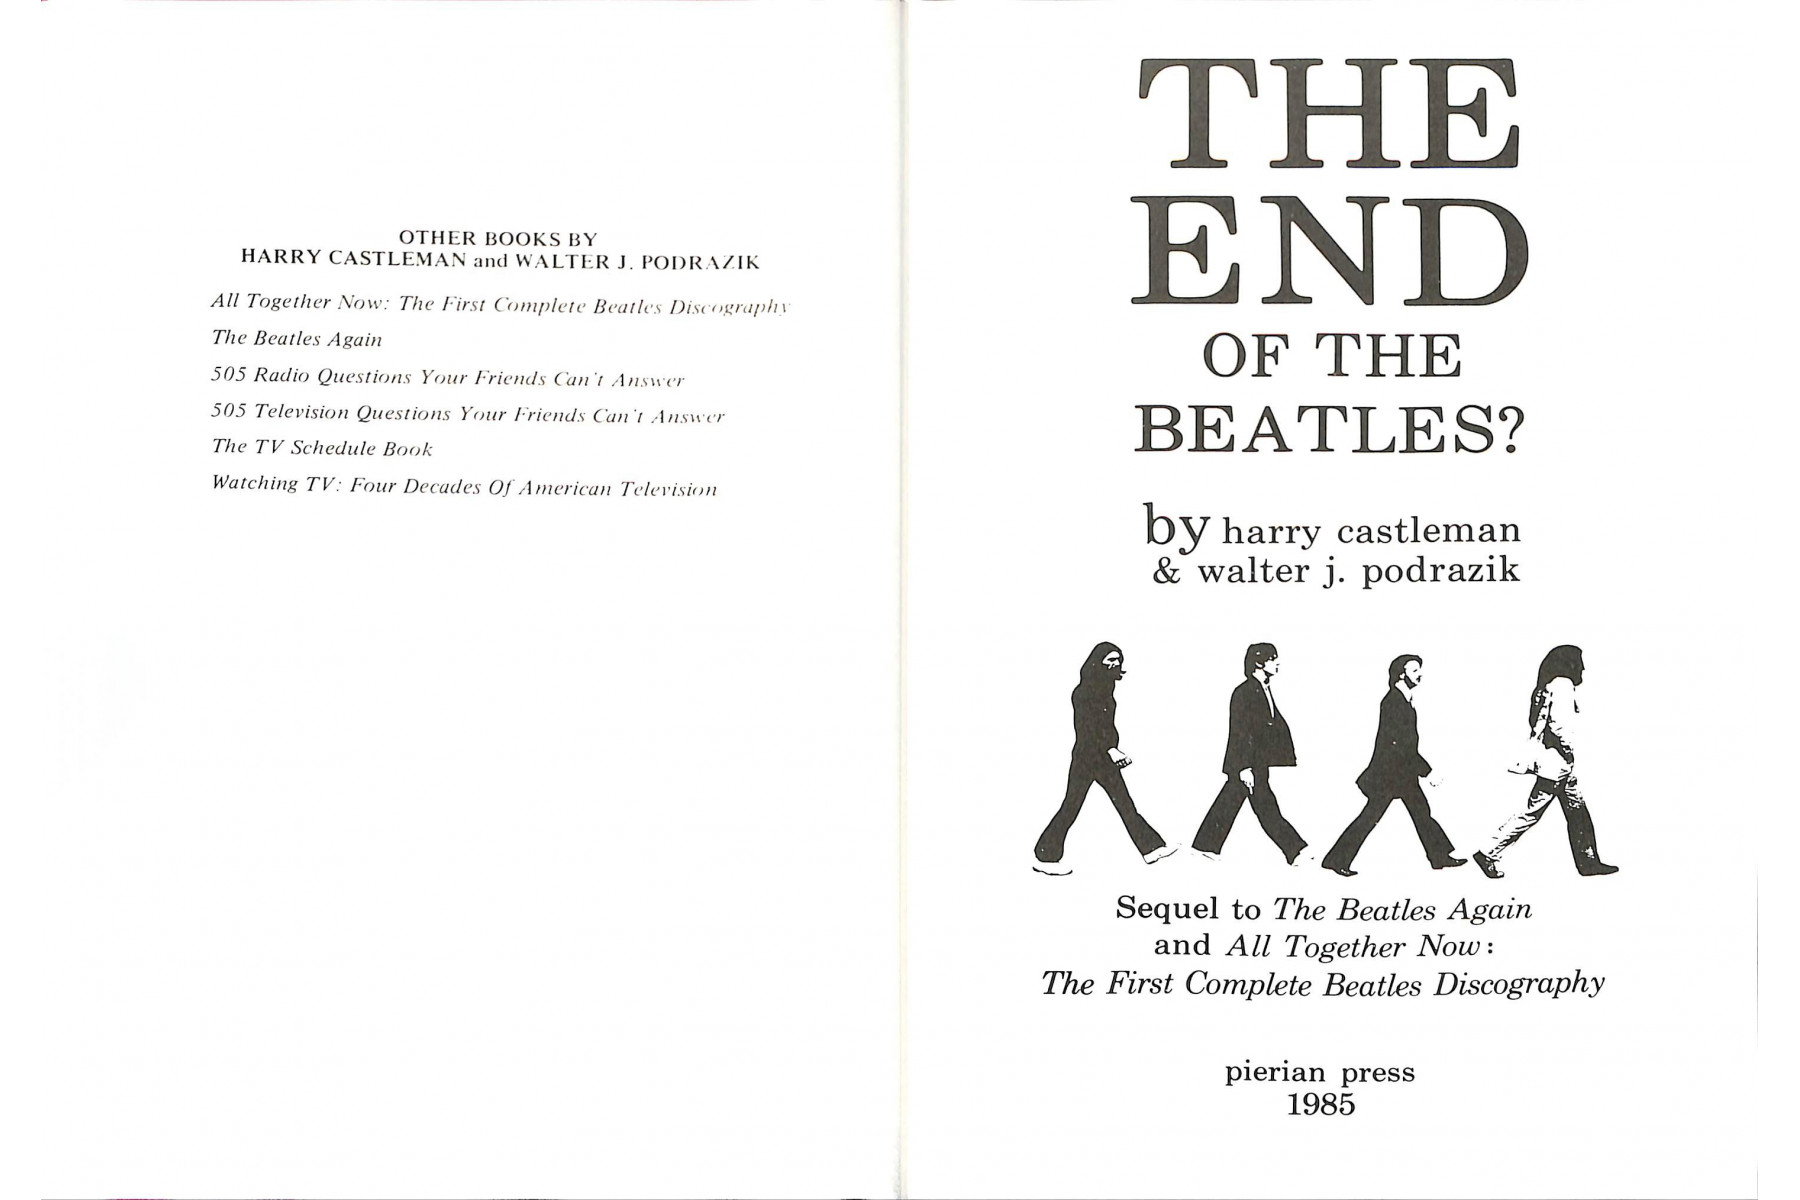 The End of the Beatles (Rock & Roll Reference Series)